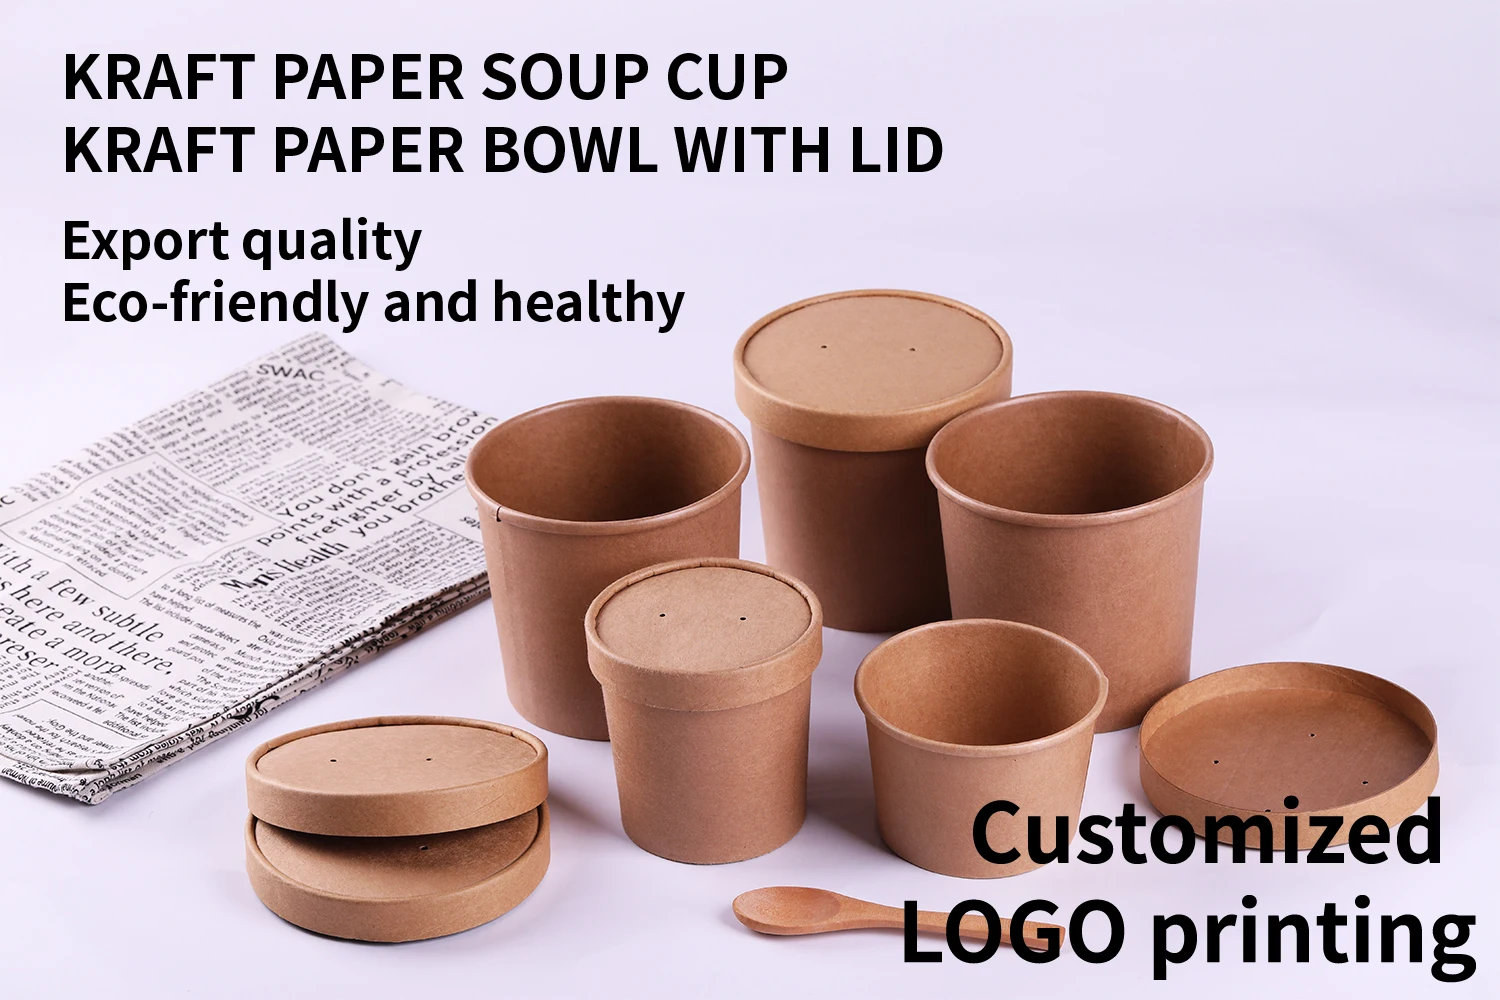 Download Disposable Kraft Paper Soup Bowl With Lids - Buy Soup Bowl,Kraft Paper Soup Bowl Product on ...